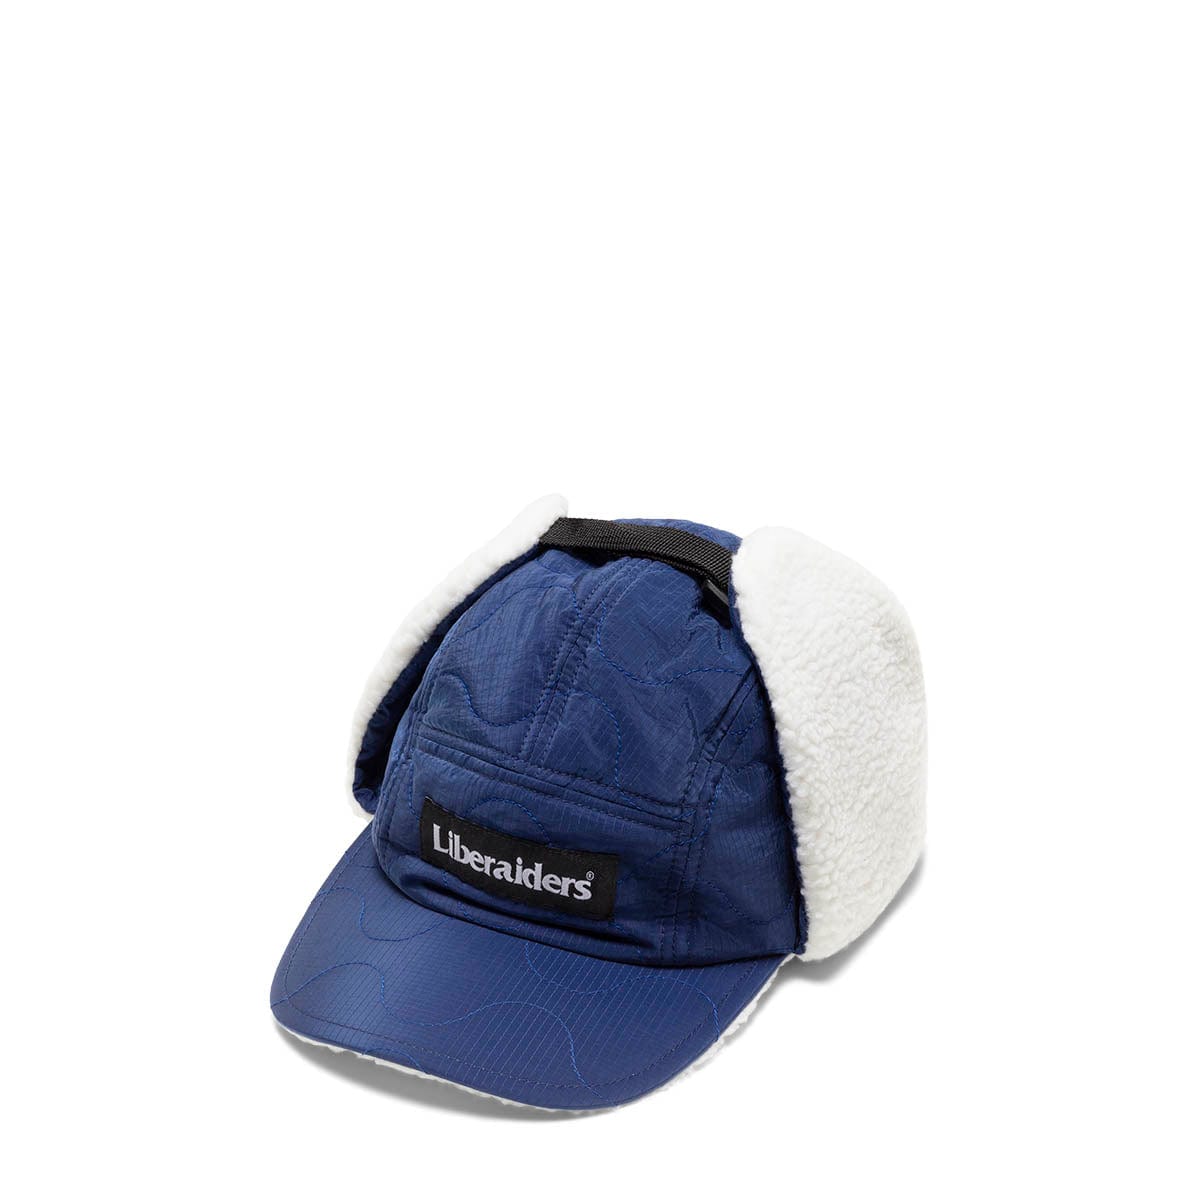 Liberaiders Headwear NAVY / O/S QUILTED NYLON DOG EAR HAT